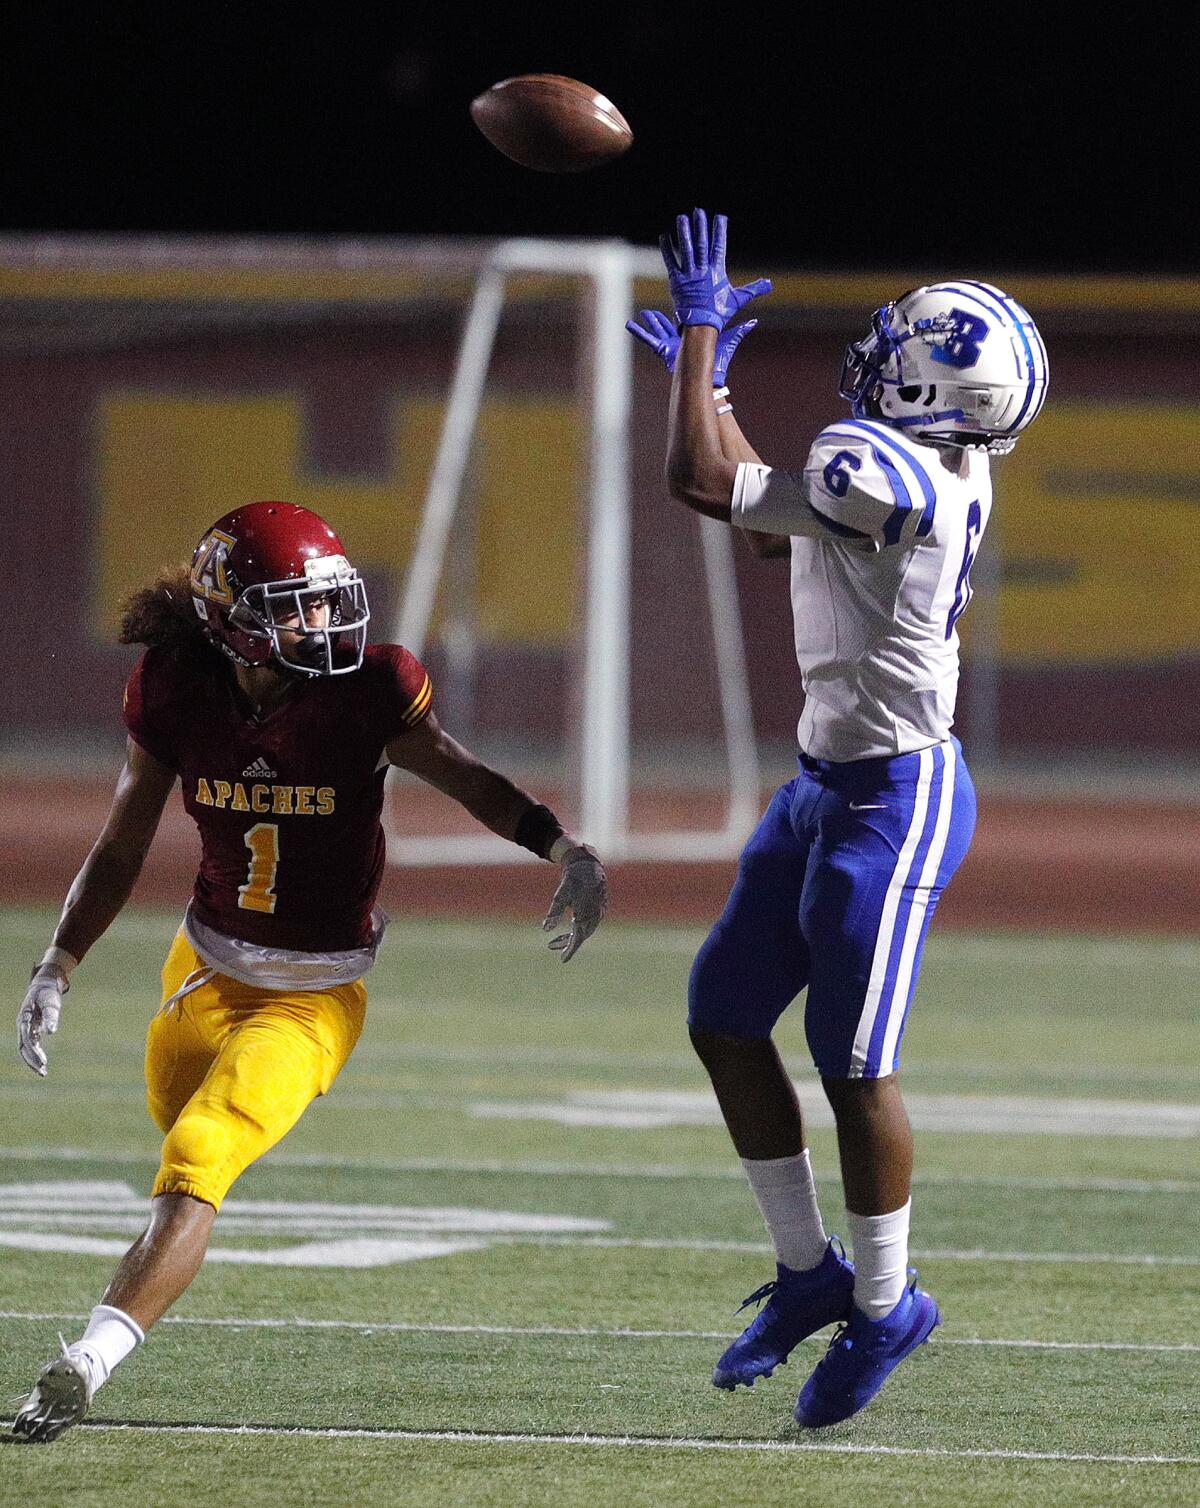 Burbank's Jarren Flowers catches the ball over Arcadia's Ty Cavallero in a Pacific League football opener at Arcadia High School on Thursday, September 19, 2019.